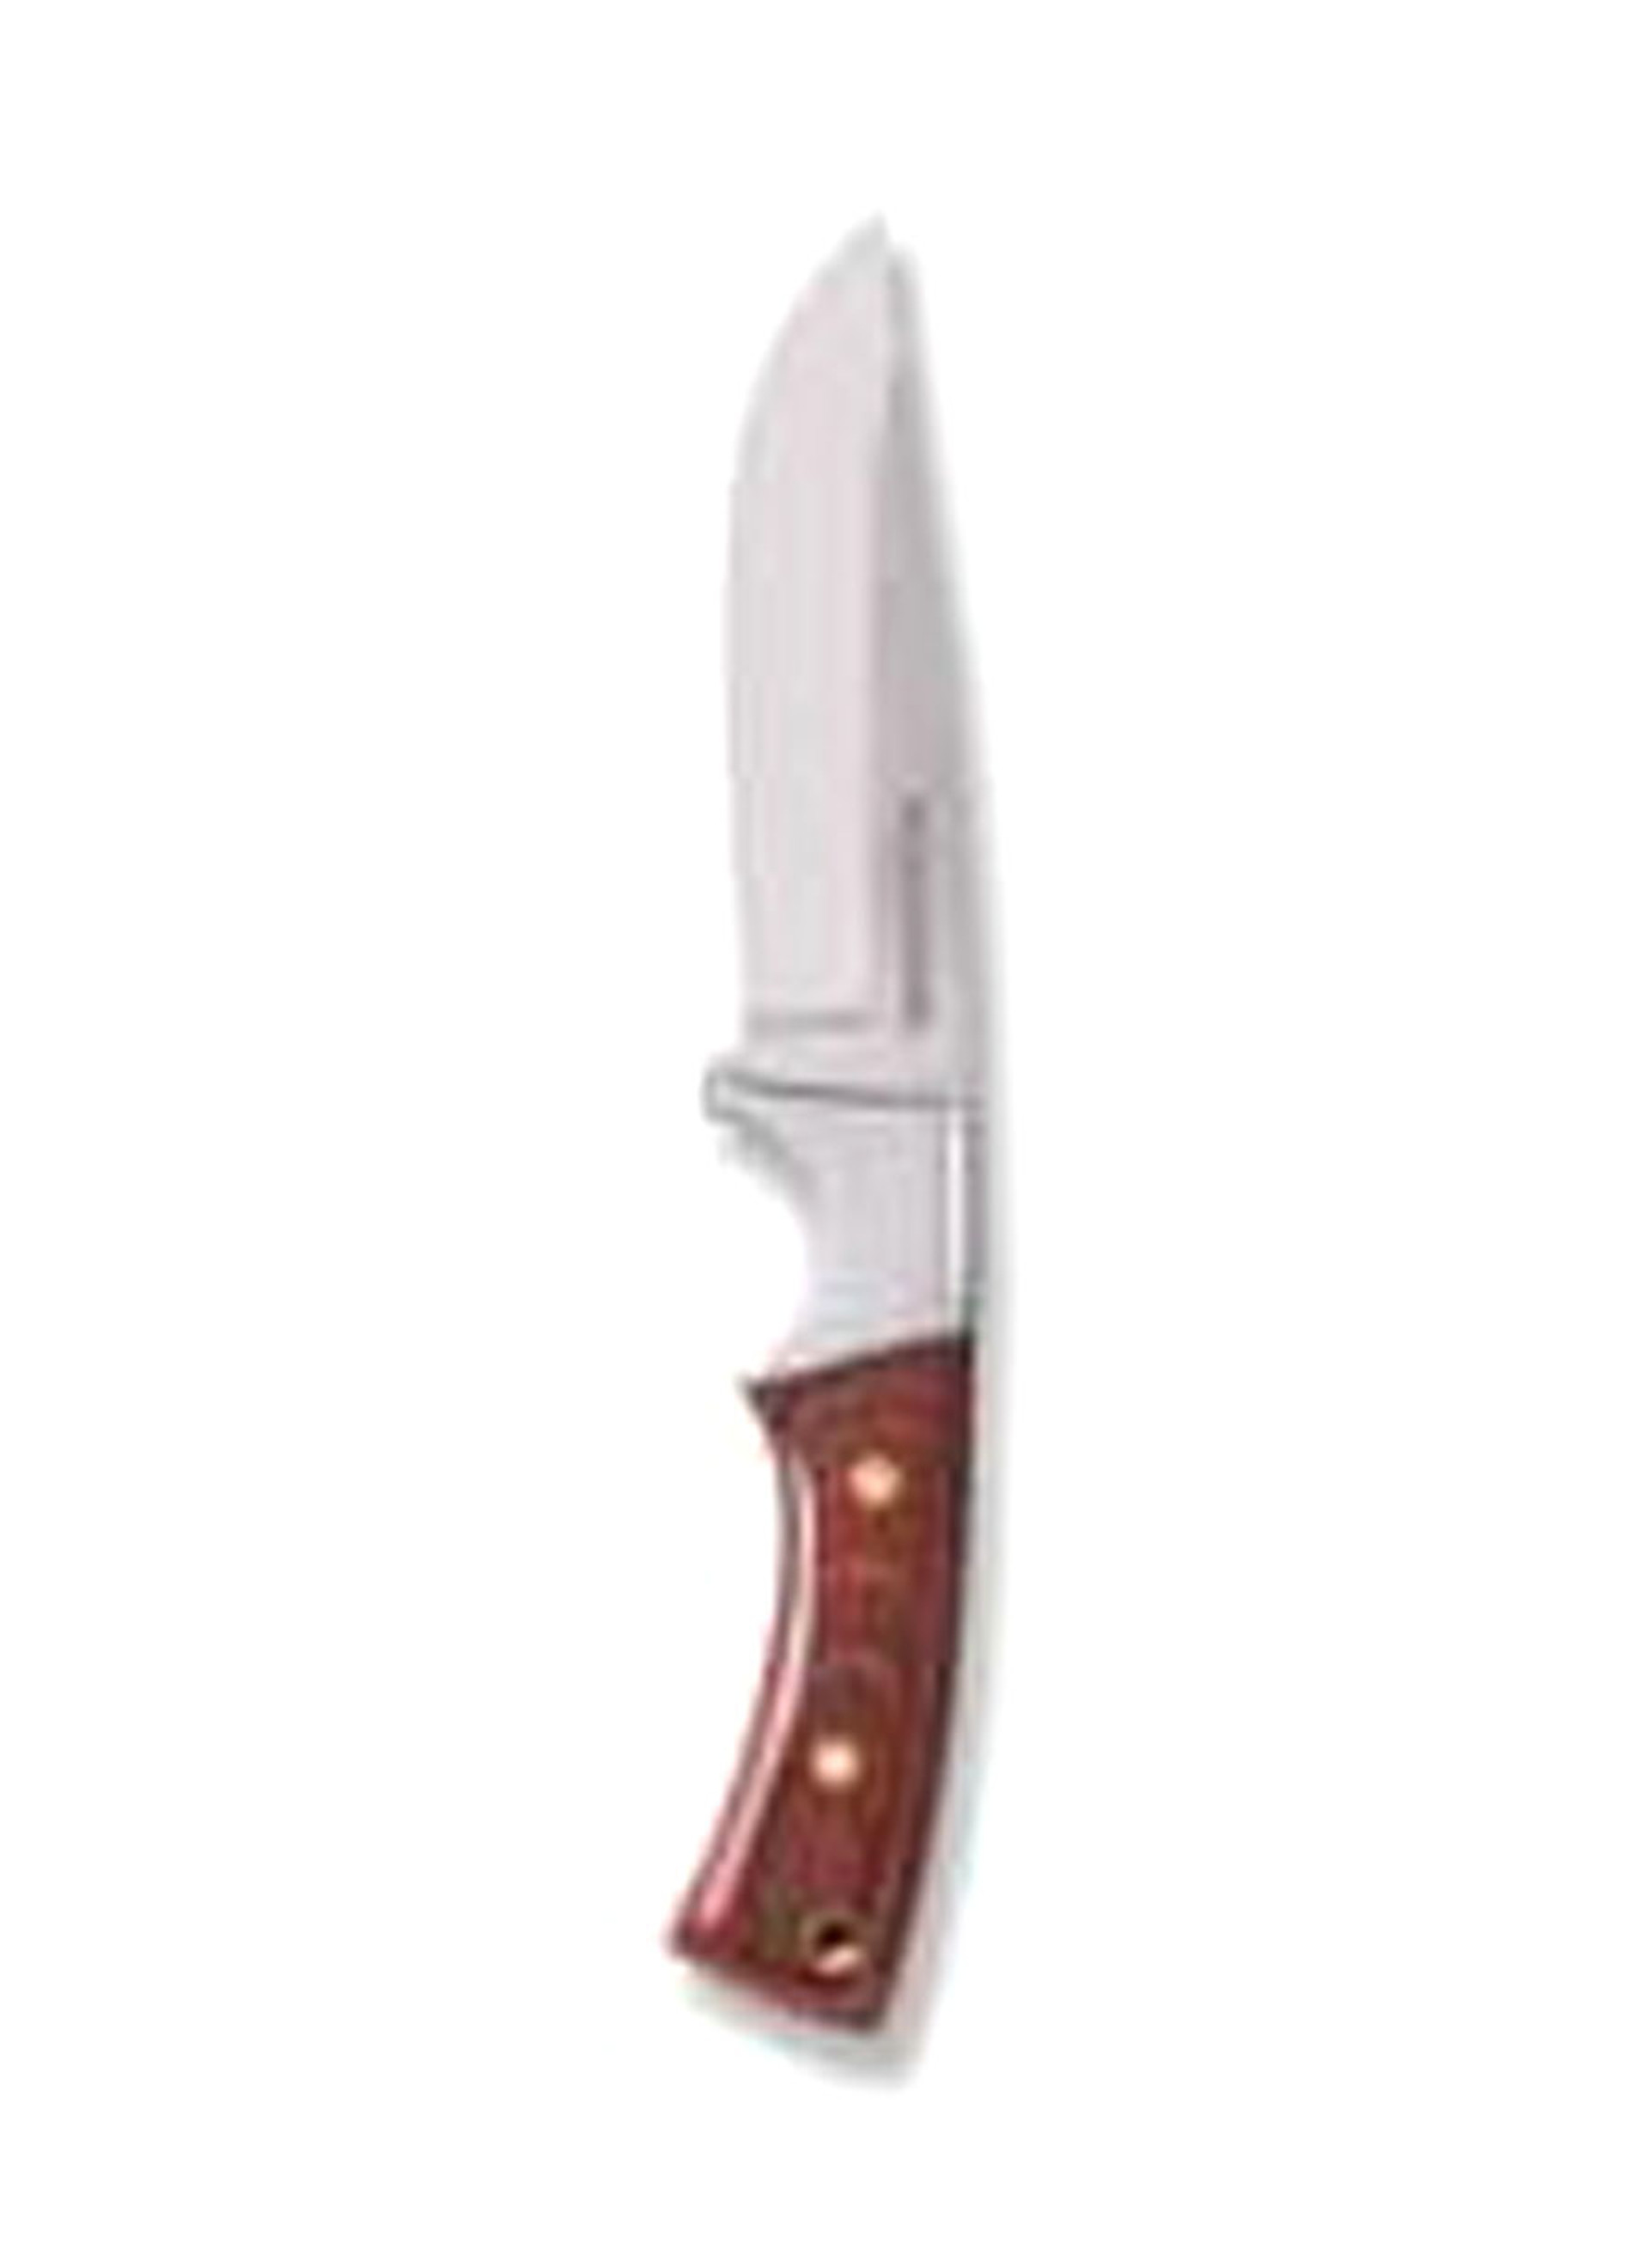 Fixed Blade Small Winchester Knife